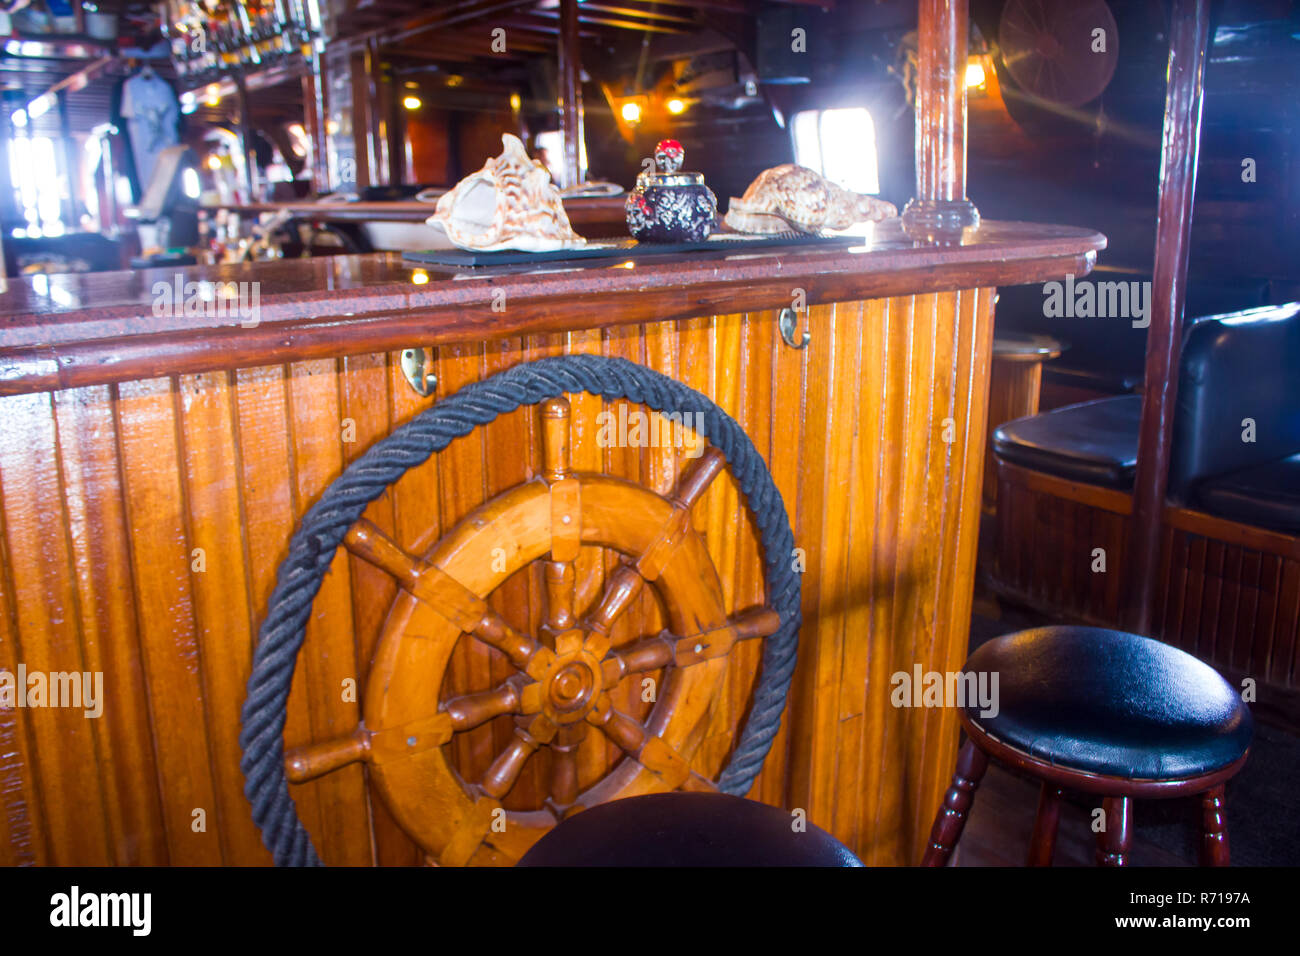 bar with old wooden furniture, pirate themes decor Stock Photo - Alamy